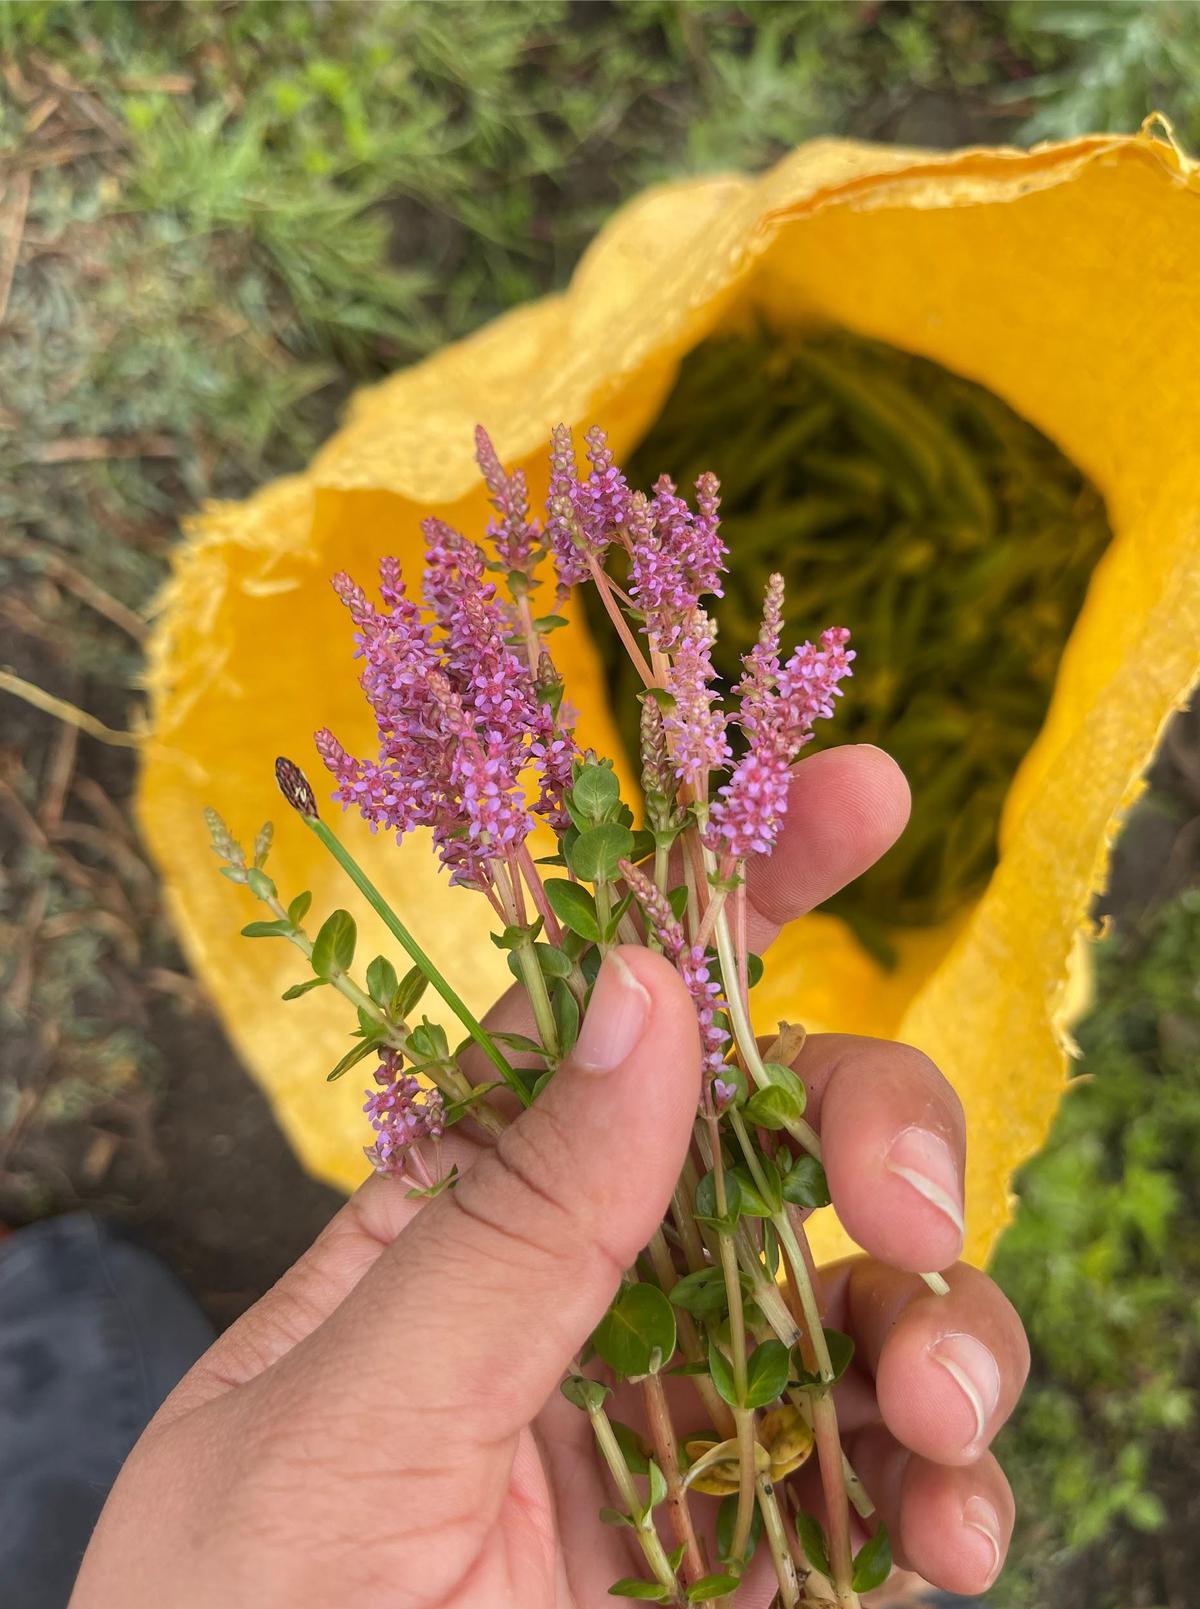 I was encouraged to pick wild edible flowers and bring them back home. I went to have a meal in a little village called Khweng, and spent some time harvesting green peas with the local women (seen in the yellow sack). These gorgeous pink flowers were everywhere in the fields.